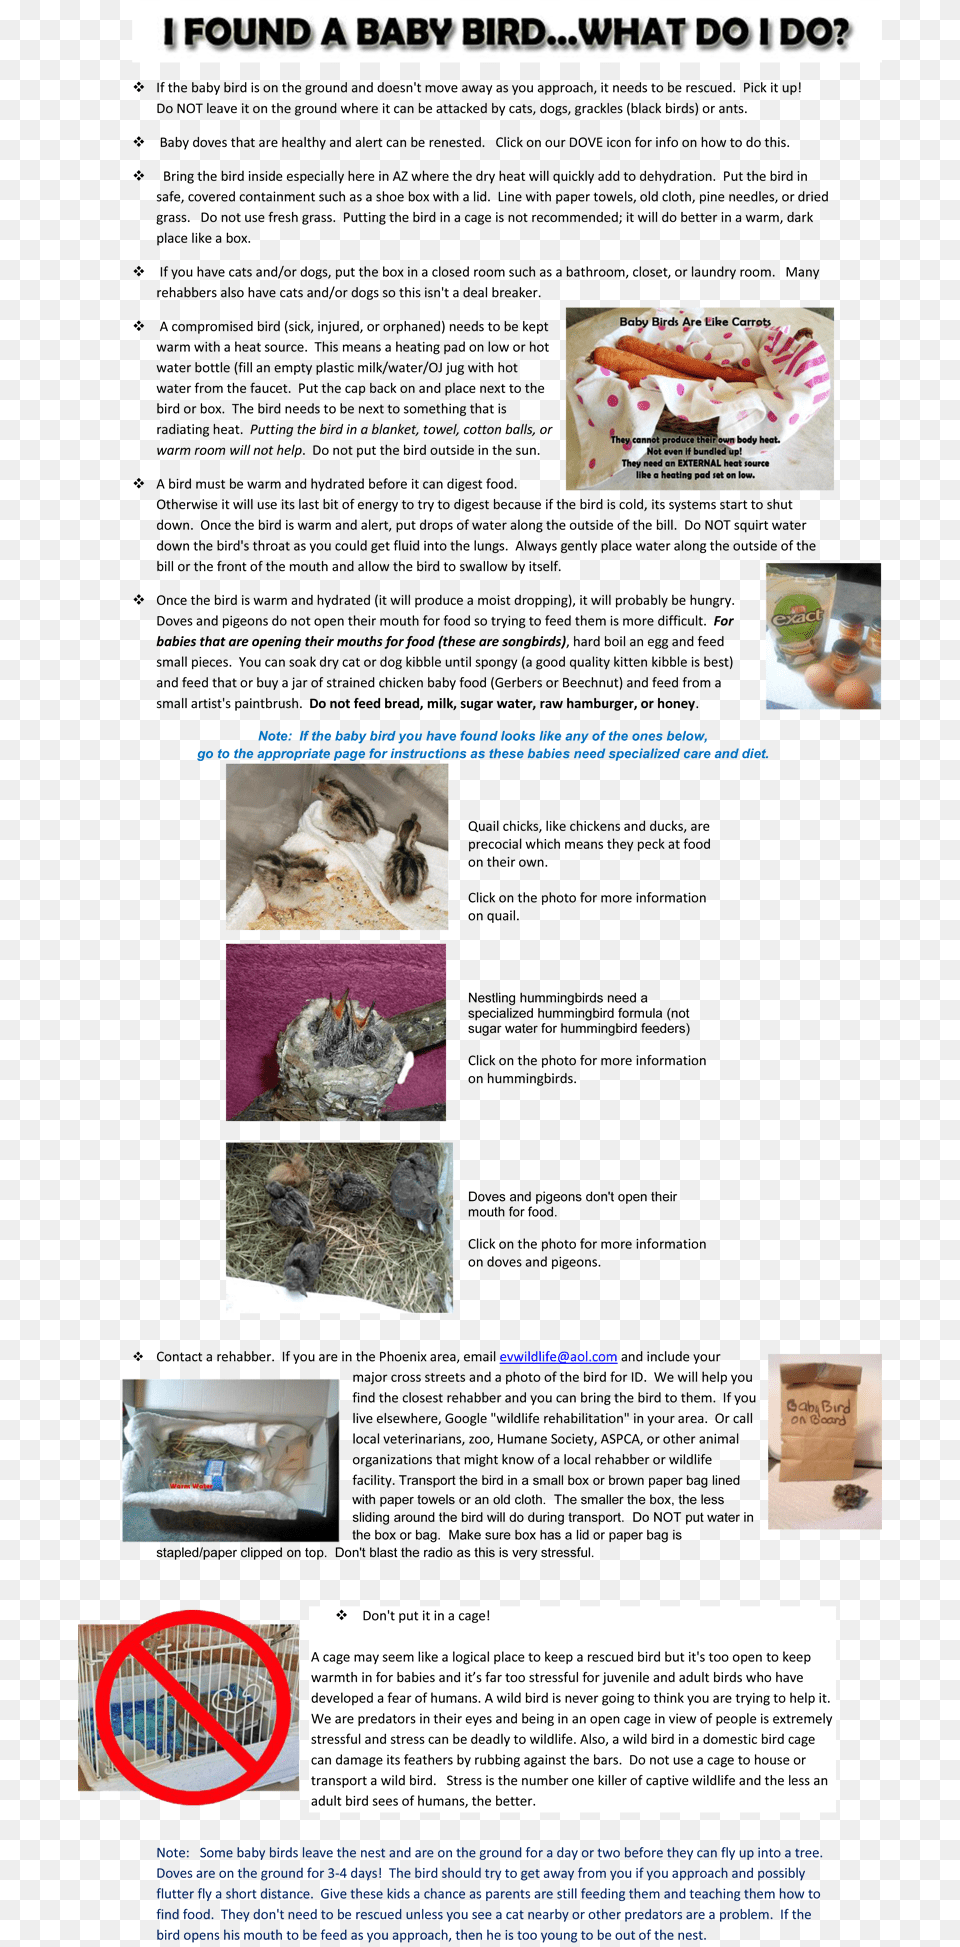 More Info On What To Do When Finding A Baby Bird Desert Breeze Hummingbird Habitat, Advertisement, Poster, Art, Collage Png Image